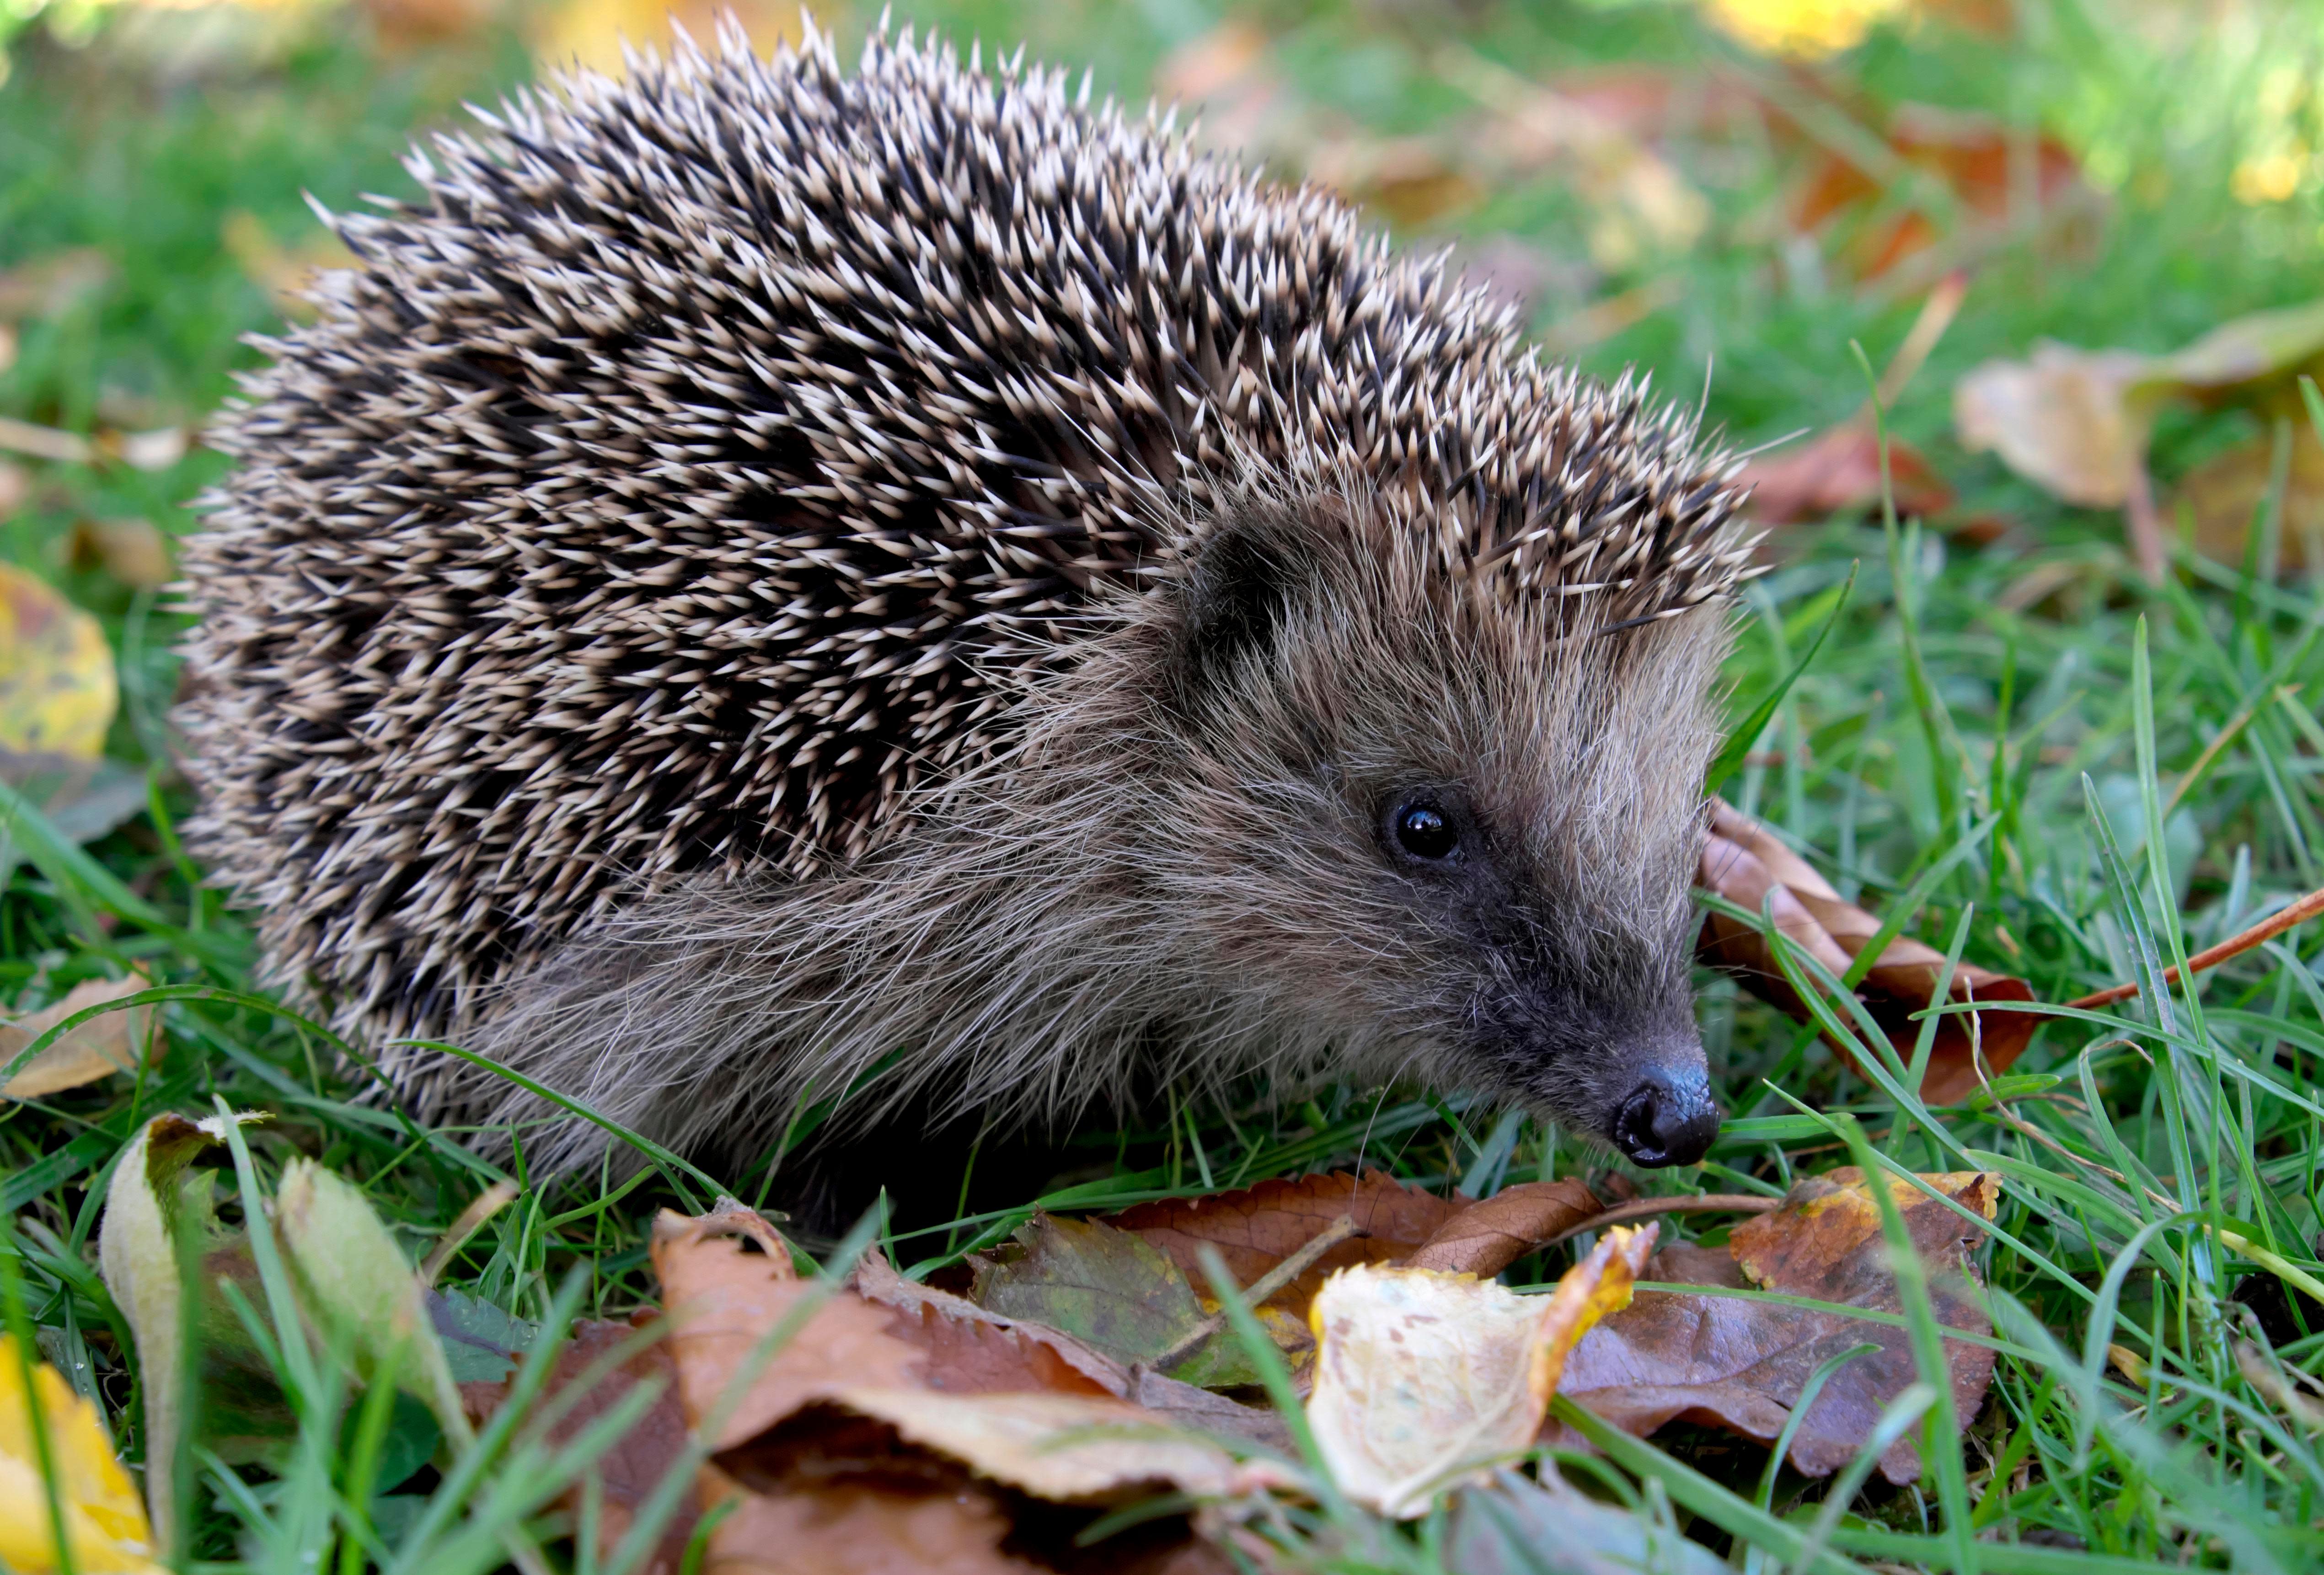 Robotic lawnmowers are a threat to hedgehogs, the animal protection organization says